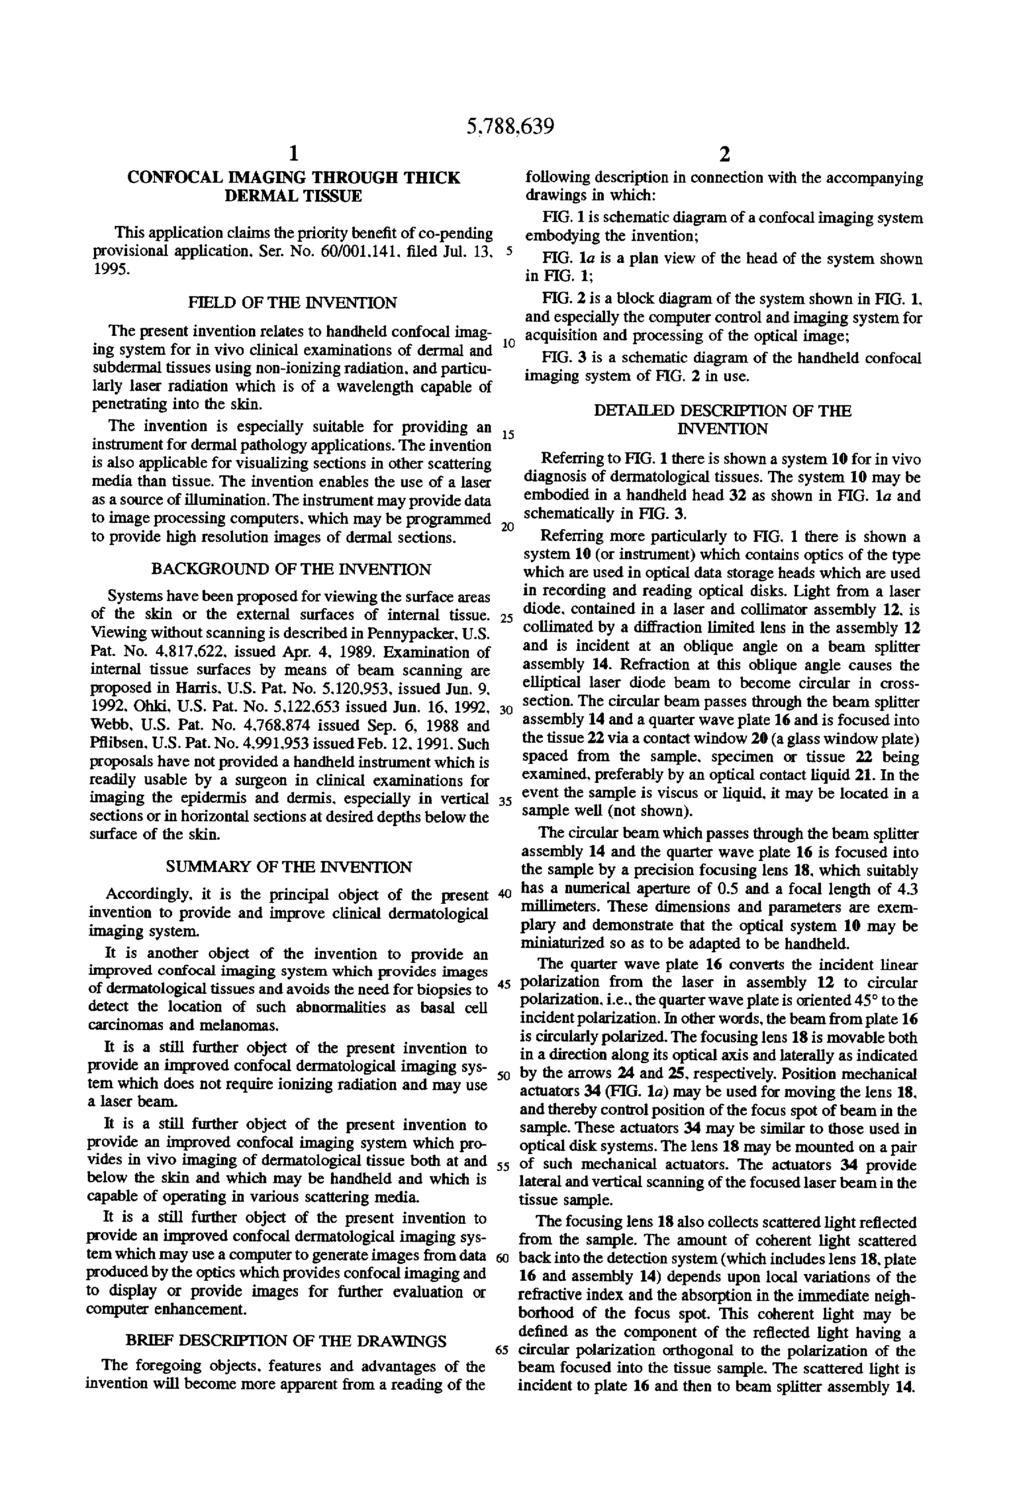 1. CONFOCAL MAGING THROUGH THECK DERMAL TISSUE This application claims the priority benefit of co-pending provisional application. Ser. No. 60/001.141. filed Jul. 13, 1995.